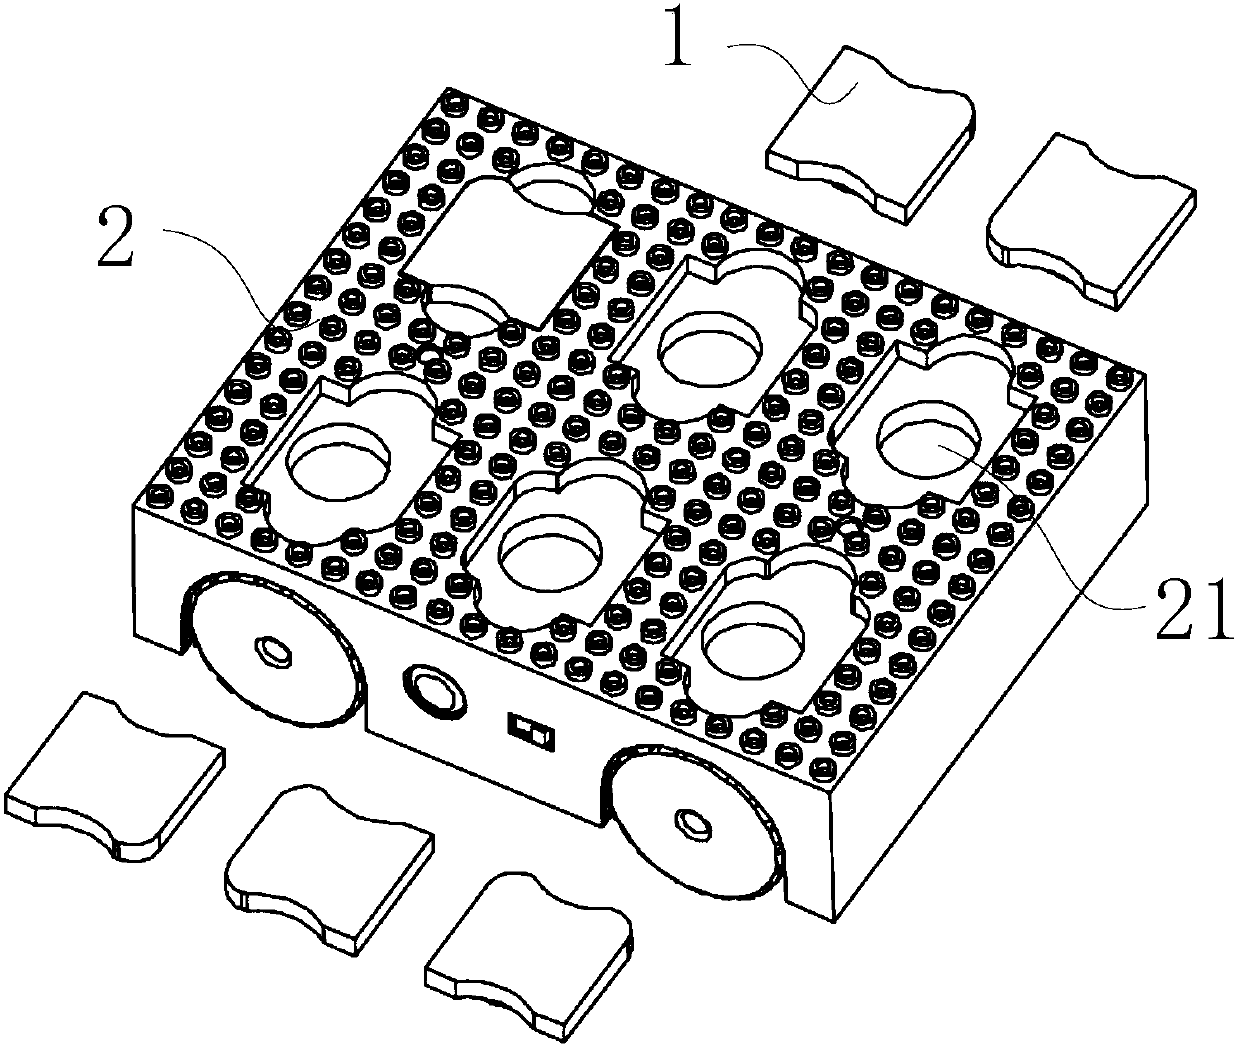 Building assembly for programmable building block model